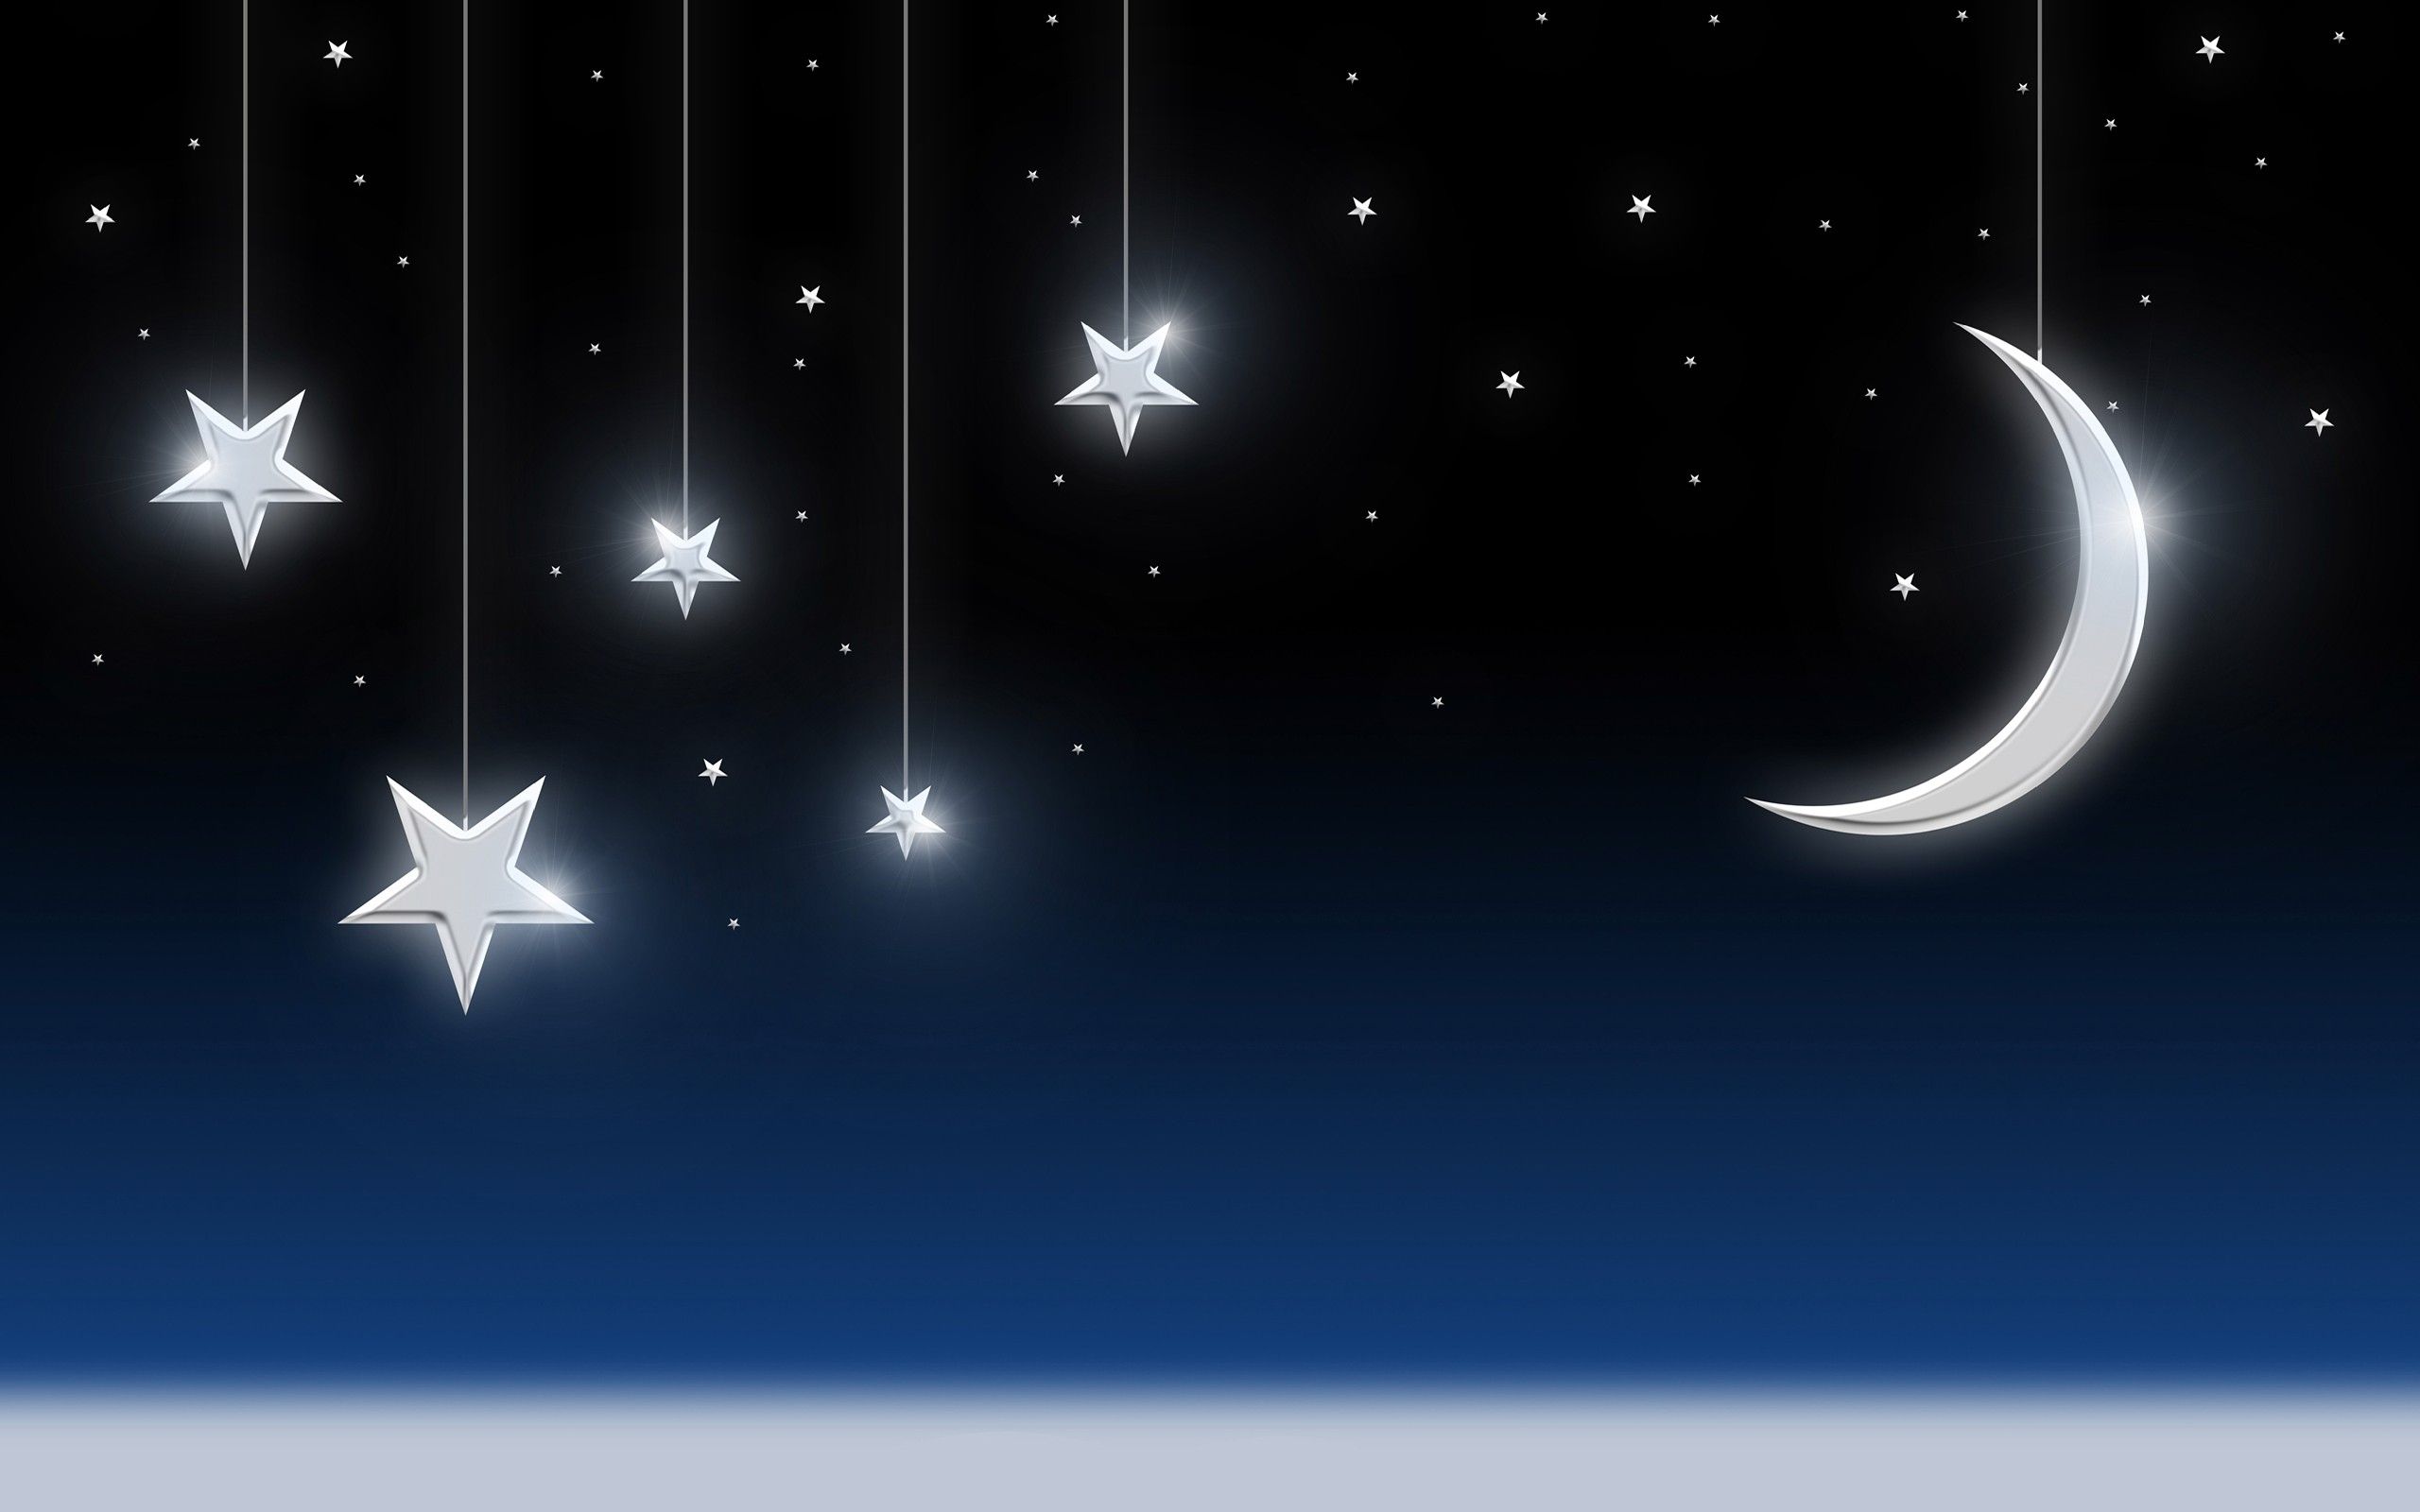 moon-and-star-background-wallpaper.jpg